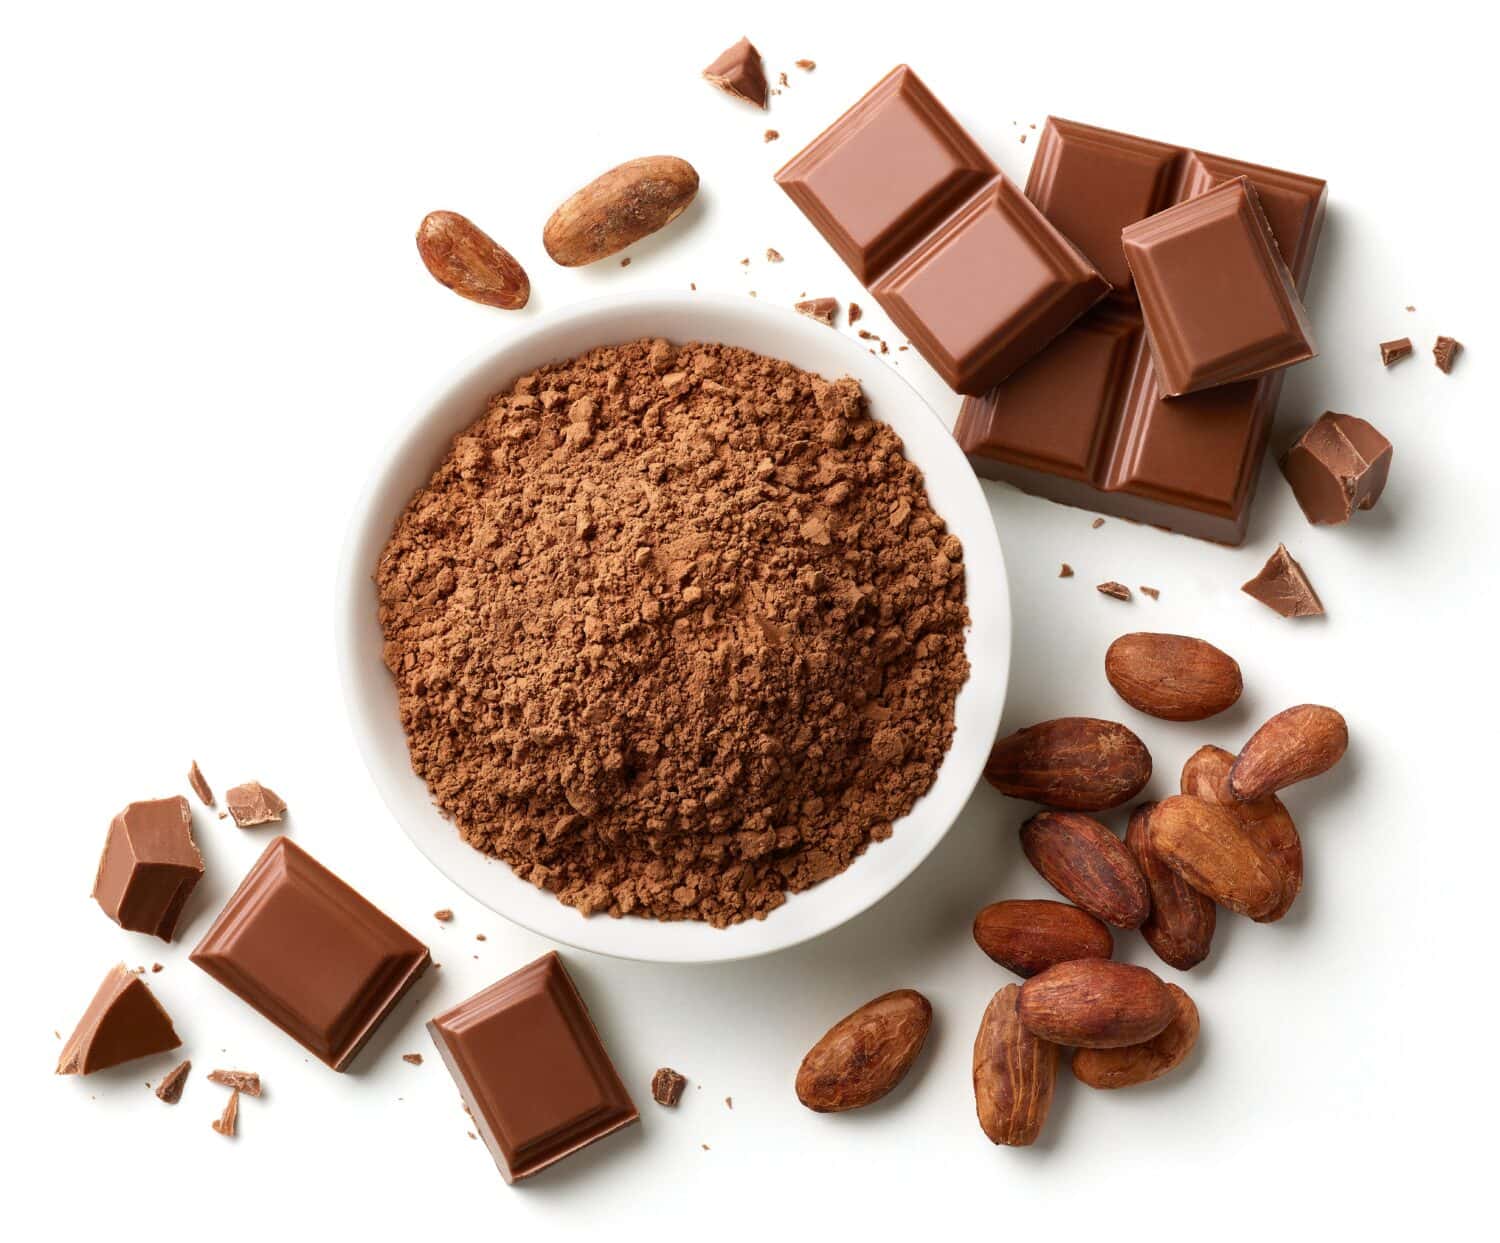 Bowl of cocoa powder, broken chocolate pieces and cocoa beans isolated on white background, top view